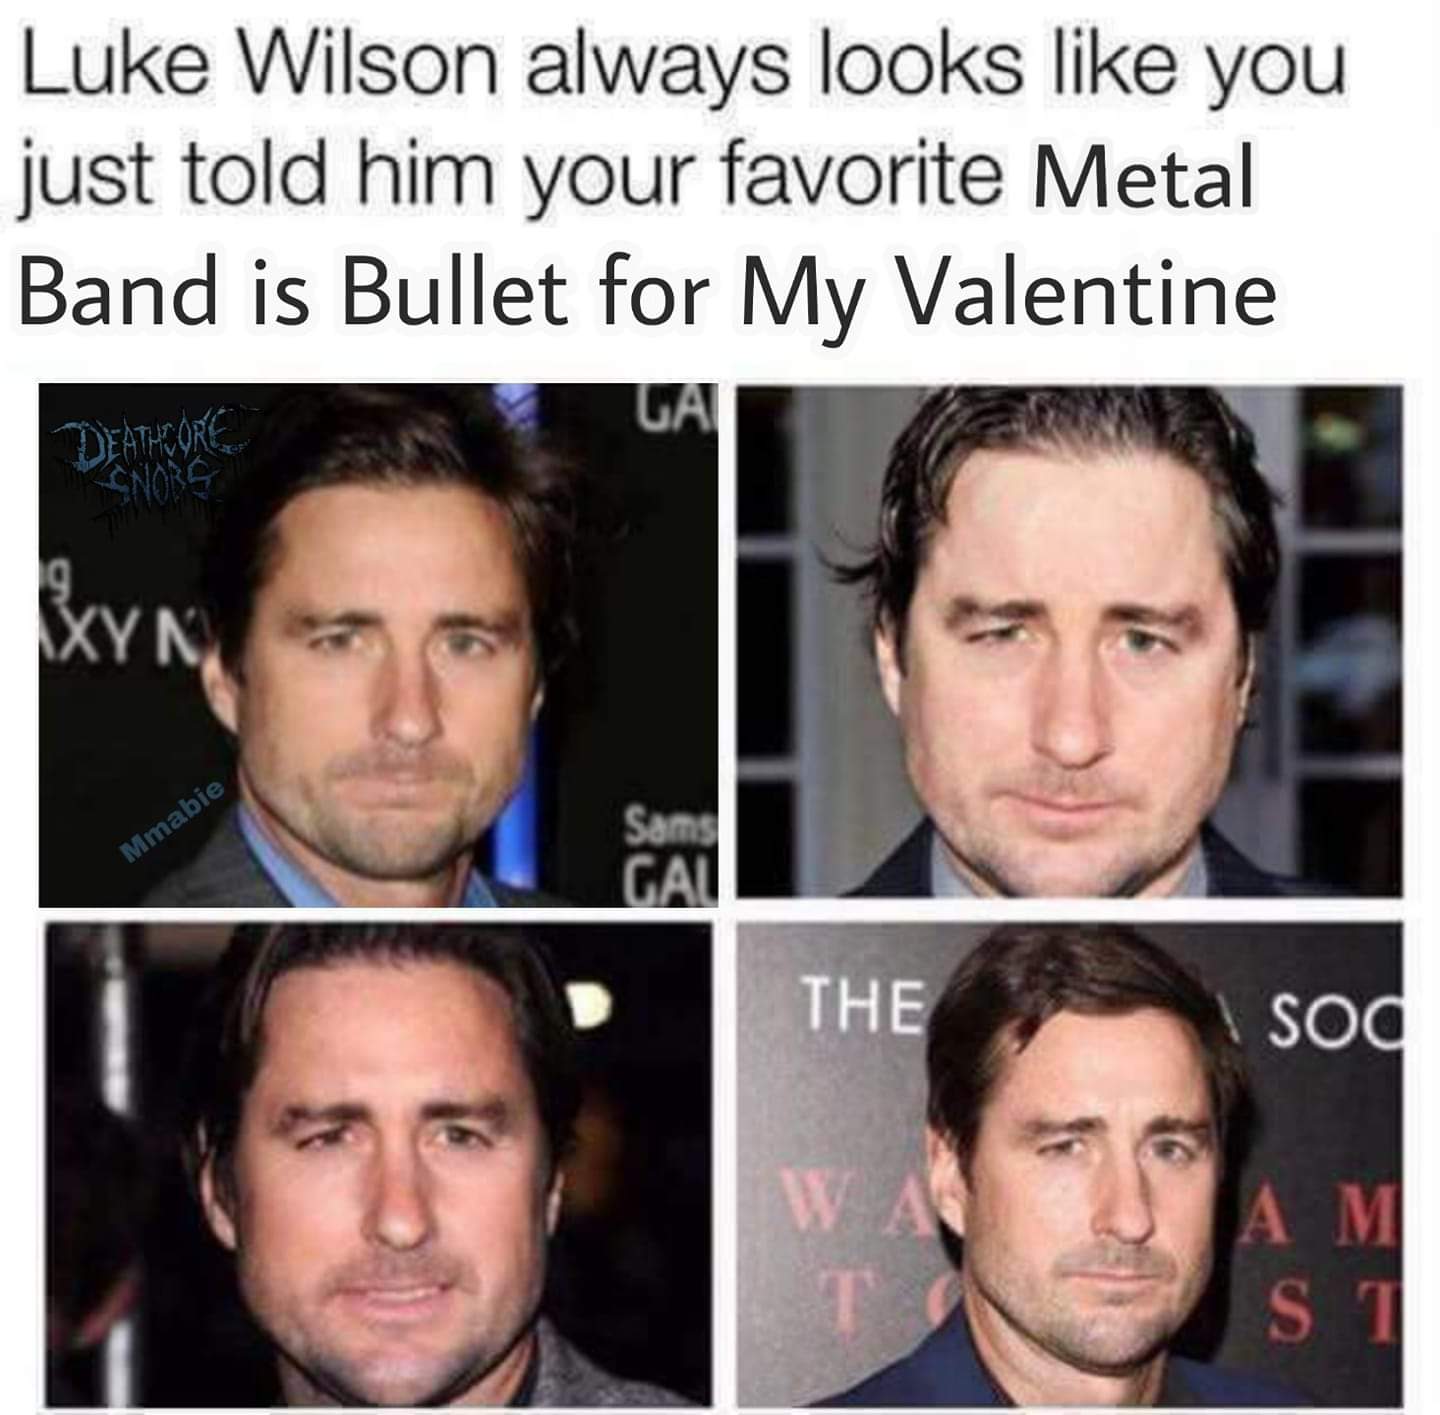 bfmv meme - Luke Wilson always looks you just told him your favorite Metal Band is Bullet for My Valentine Norg Mmabie The sod Am S1